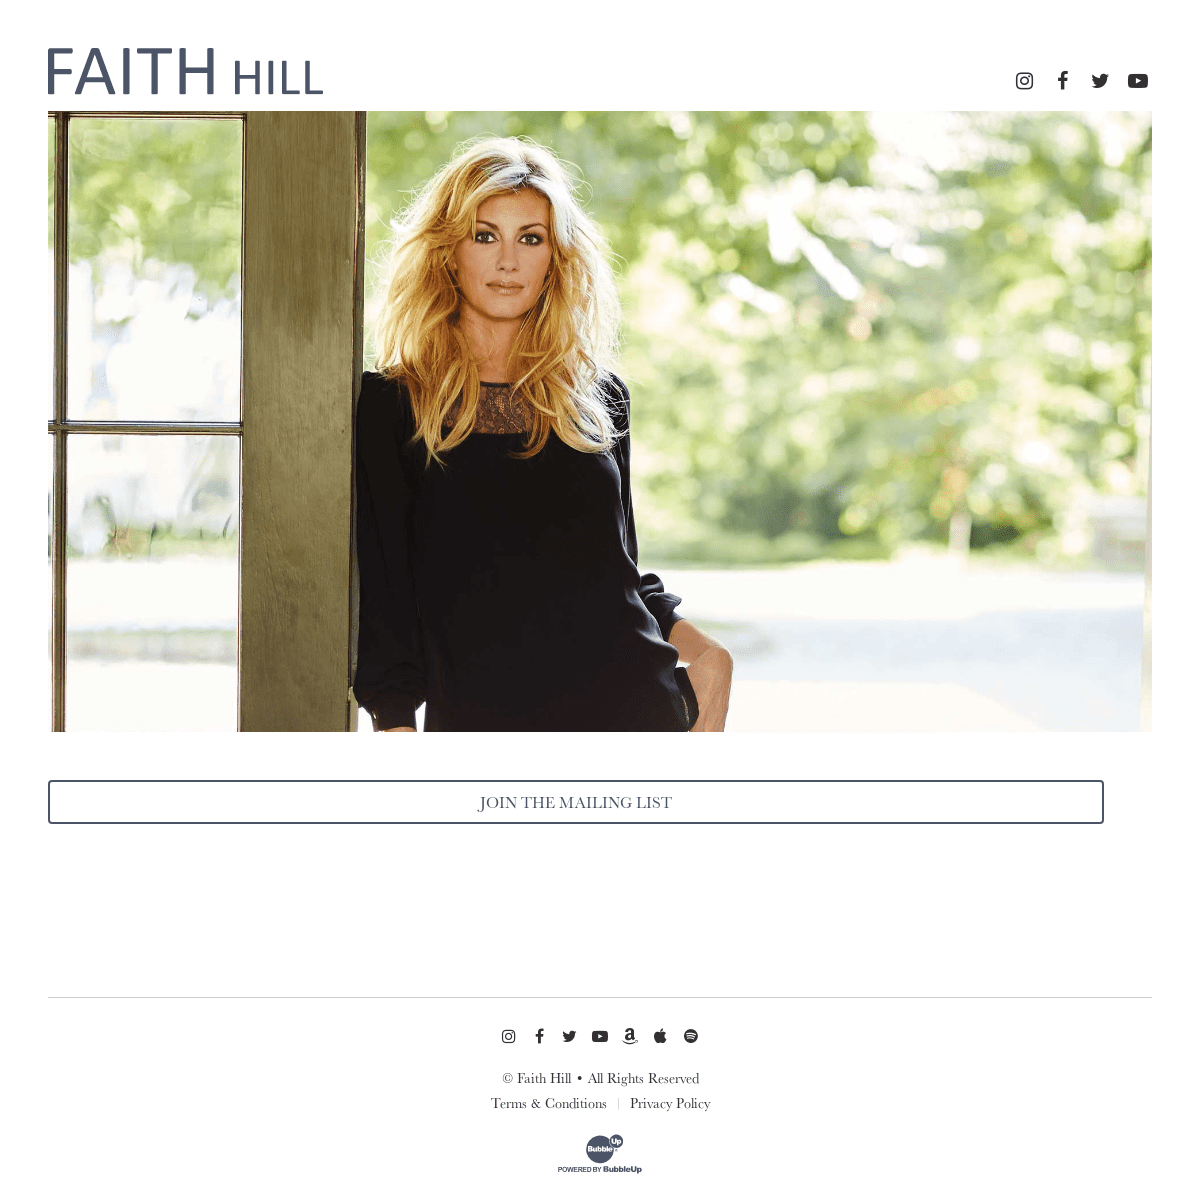 A complete backup of https://faithhill.com